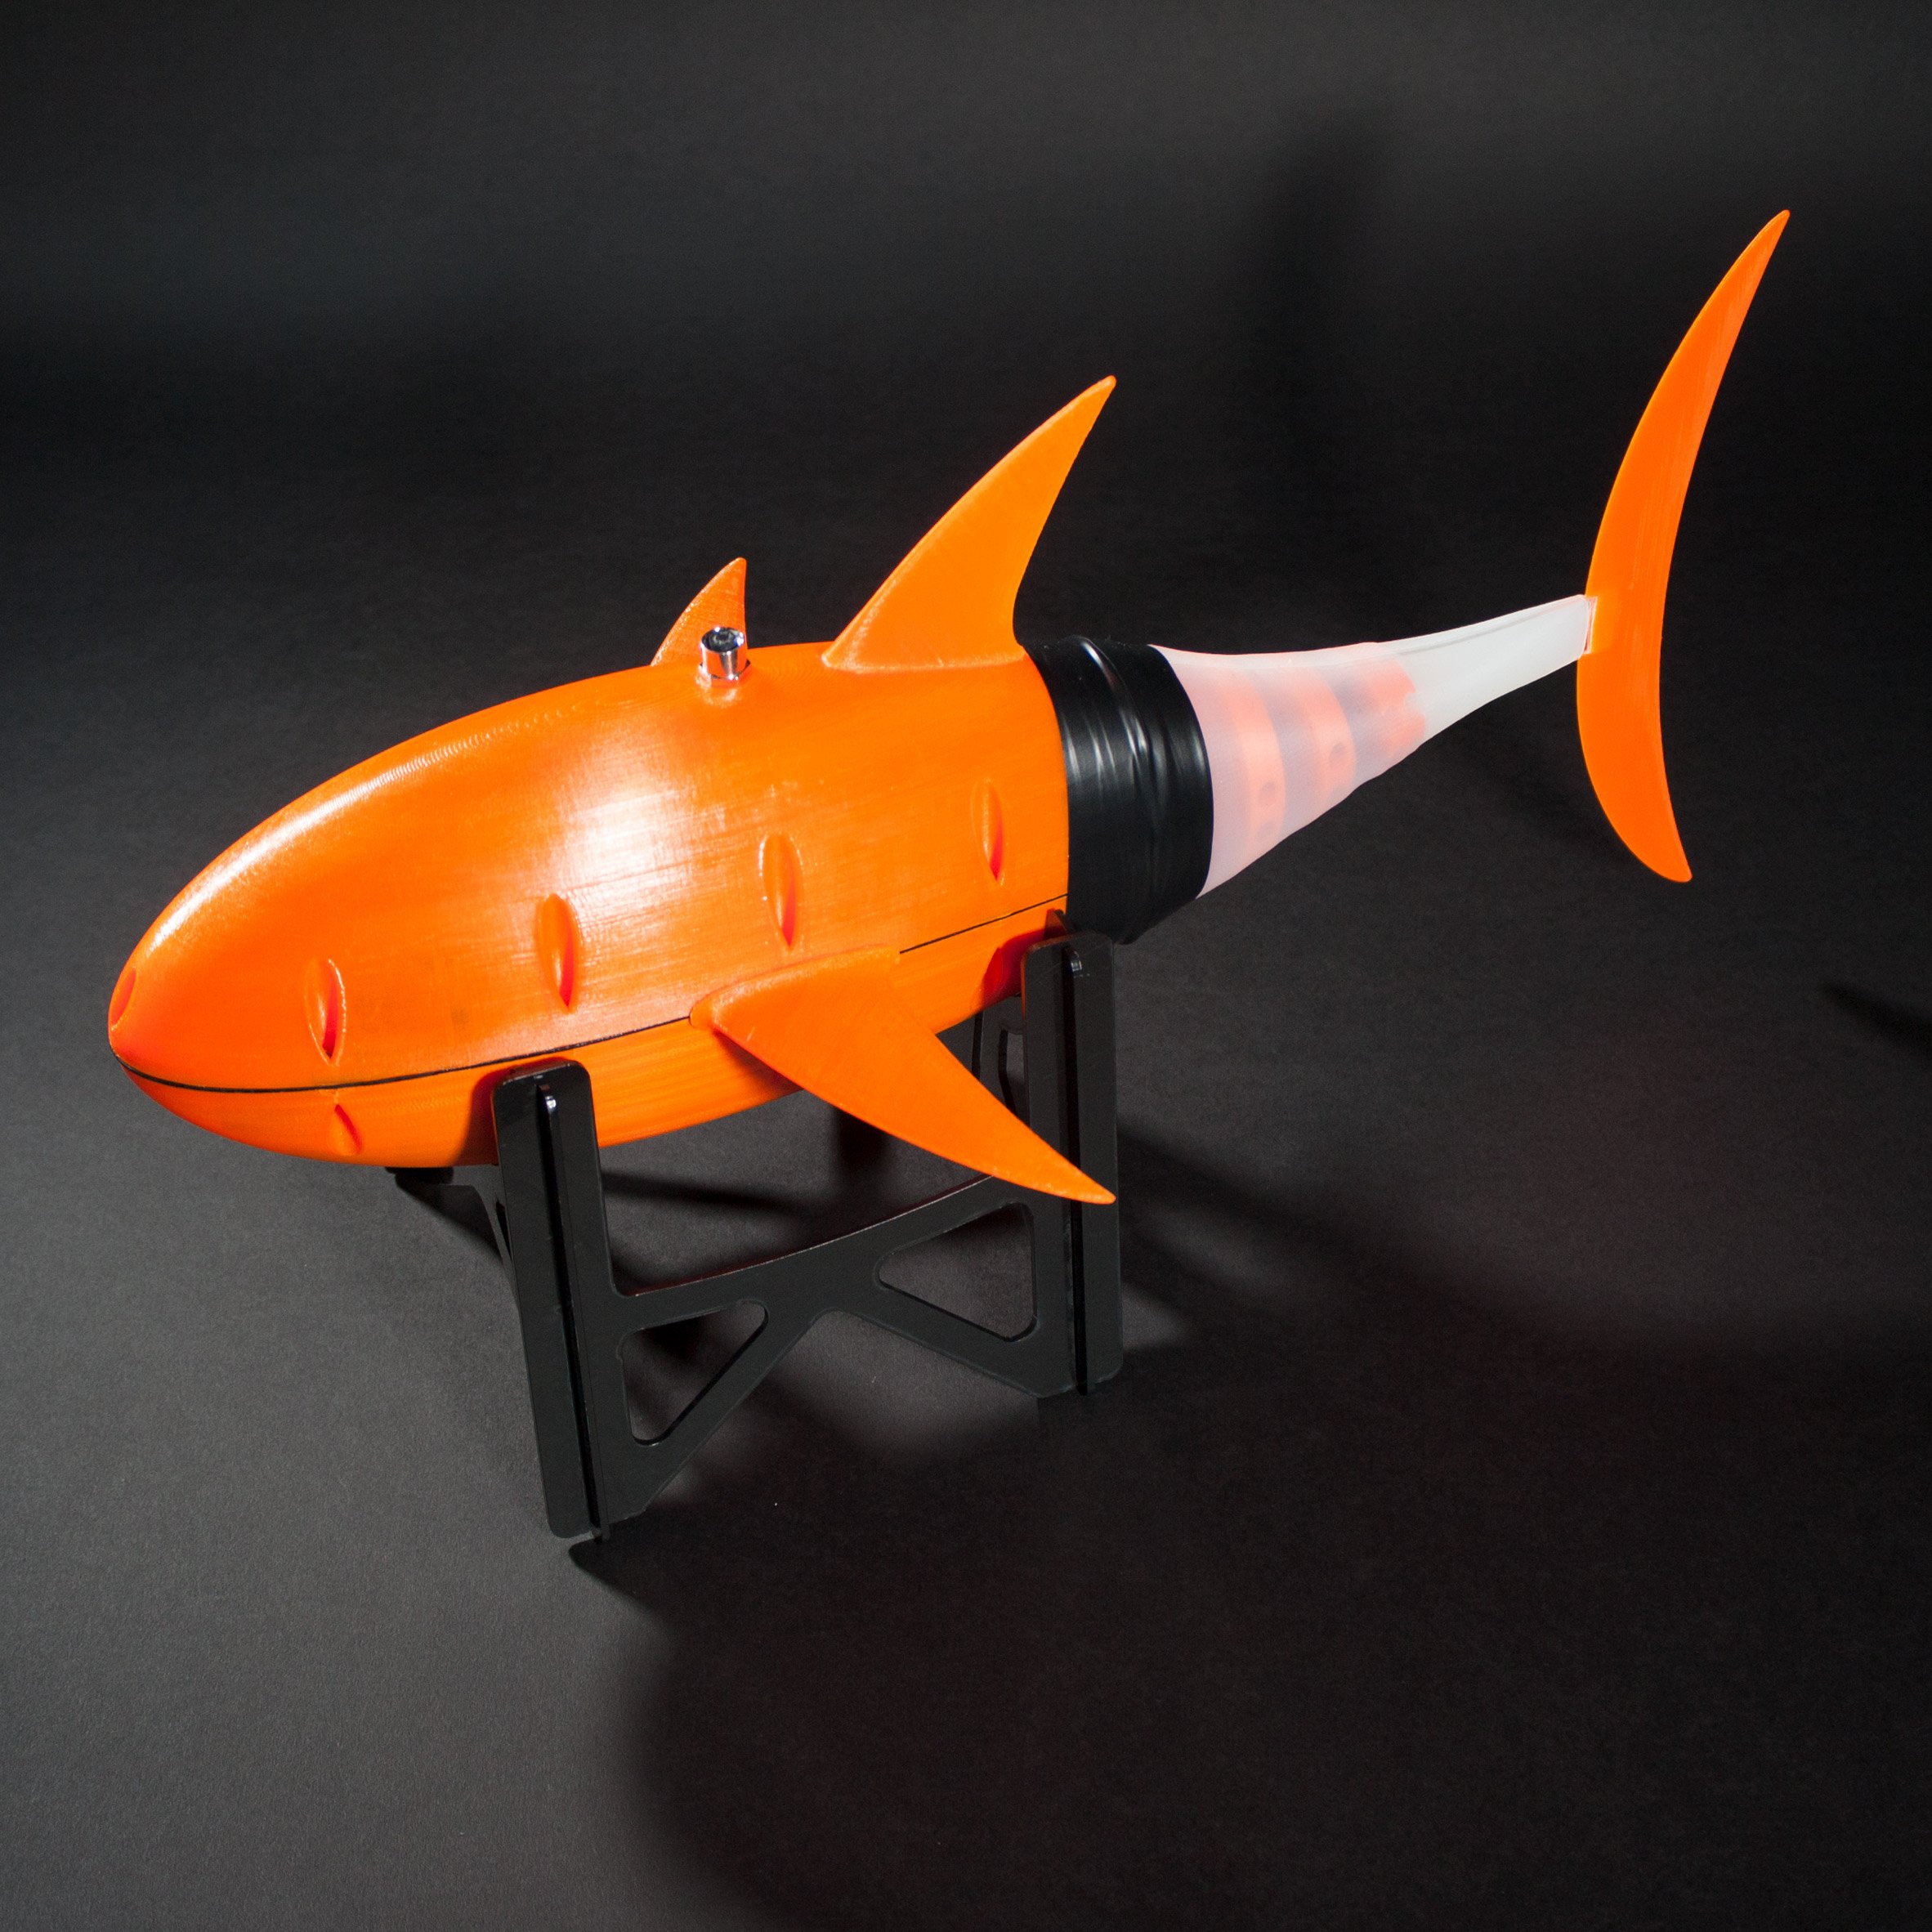 Robotic fish swims through water by mimicking the movement of a tuna